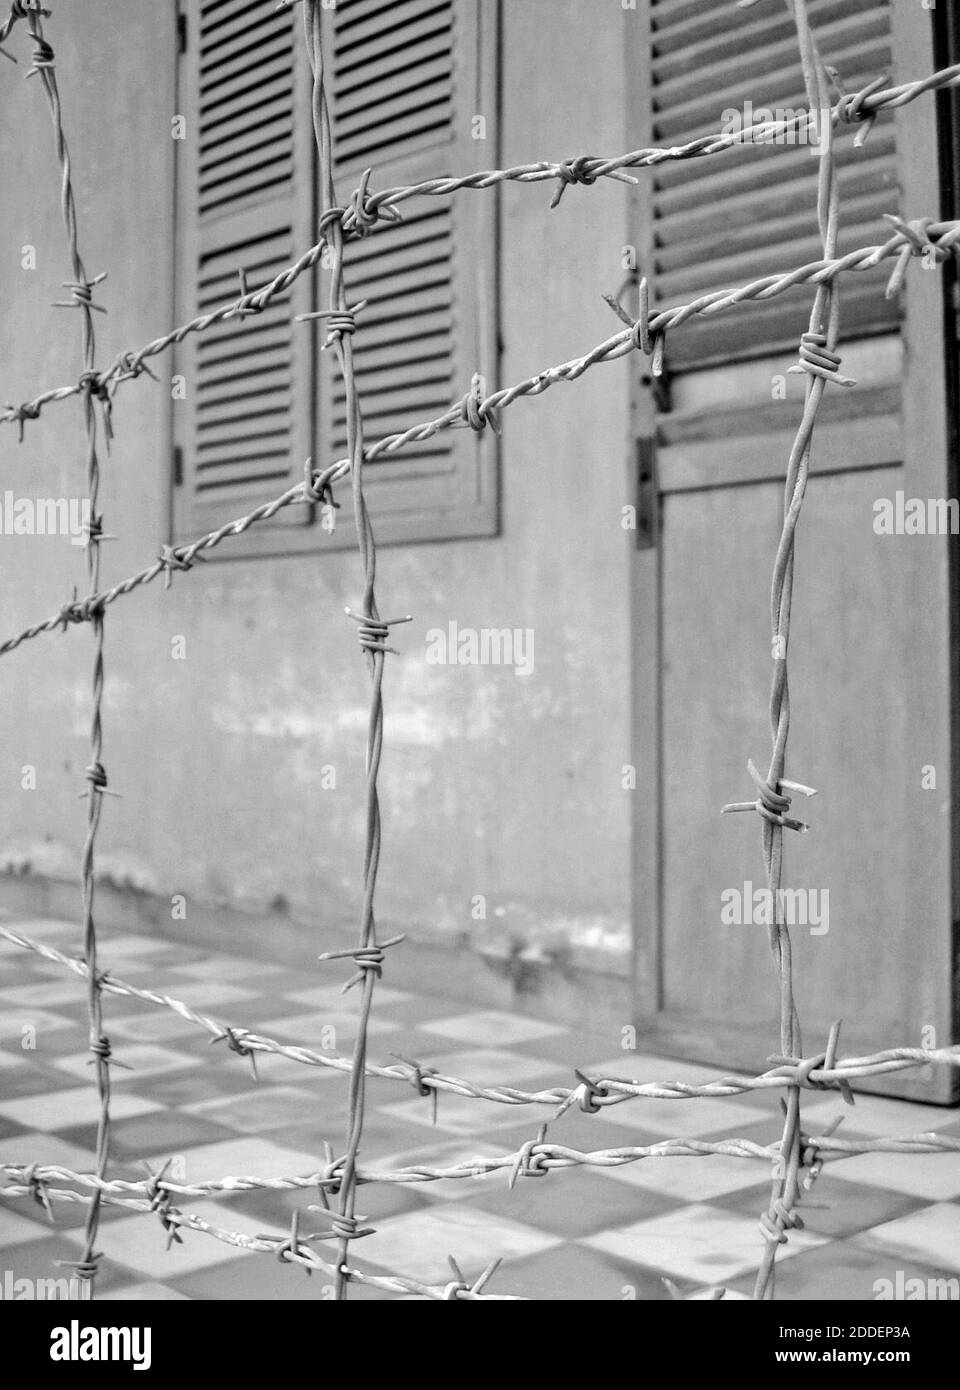 Barbed wire acts as one of barriers used by the Khmer Rouge in what is now the Tuol Sleng Genocide Museum in Phnom Penh, Cambodia.  Once a secondary school, Tuol Sway Pray High School, from 1976-1979 it became Security Prison 21 (S-21).  Composed of several buildings, the campus became an internment camp where an estimated 20,000 persons were imprisoned, tortured, and died.  Enclosed in electrified barbed wire, the former school was uncovered by the conquering Vietnamese Army.  Out of the over 20,000 prisoners, there were 12 known survivors.  The school is now the Tuol Sleng Genocide Museum. Stock Photo